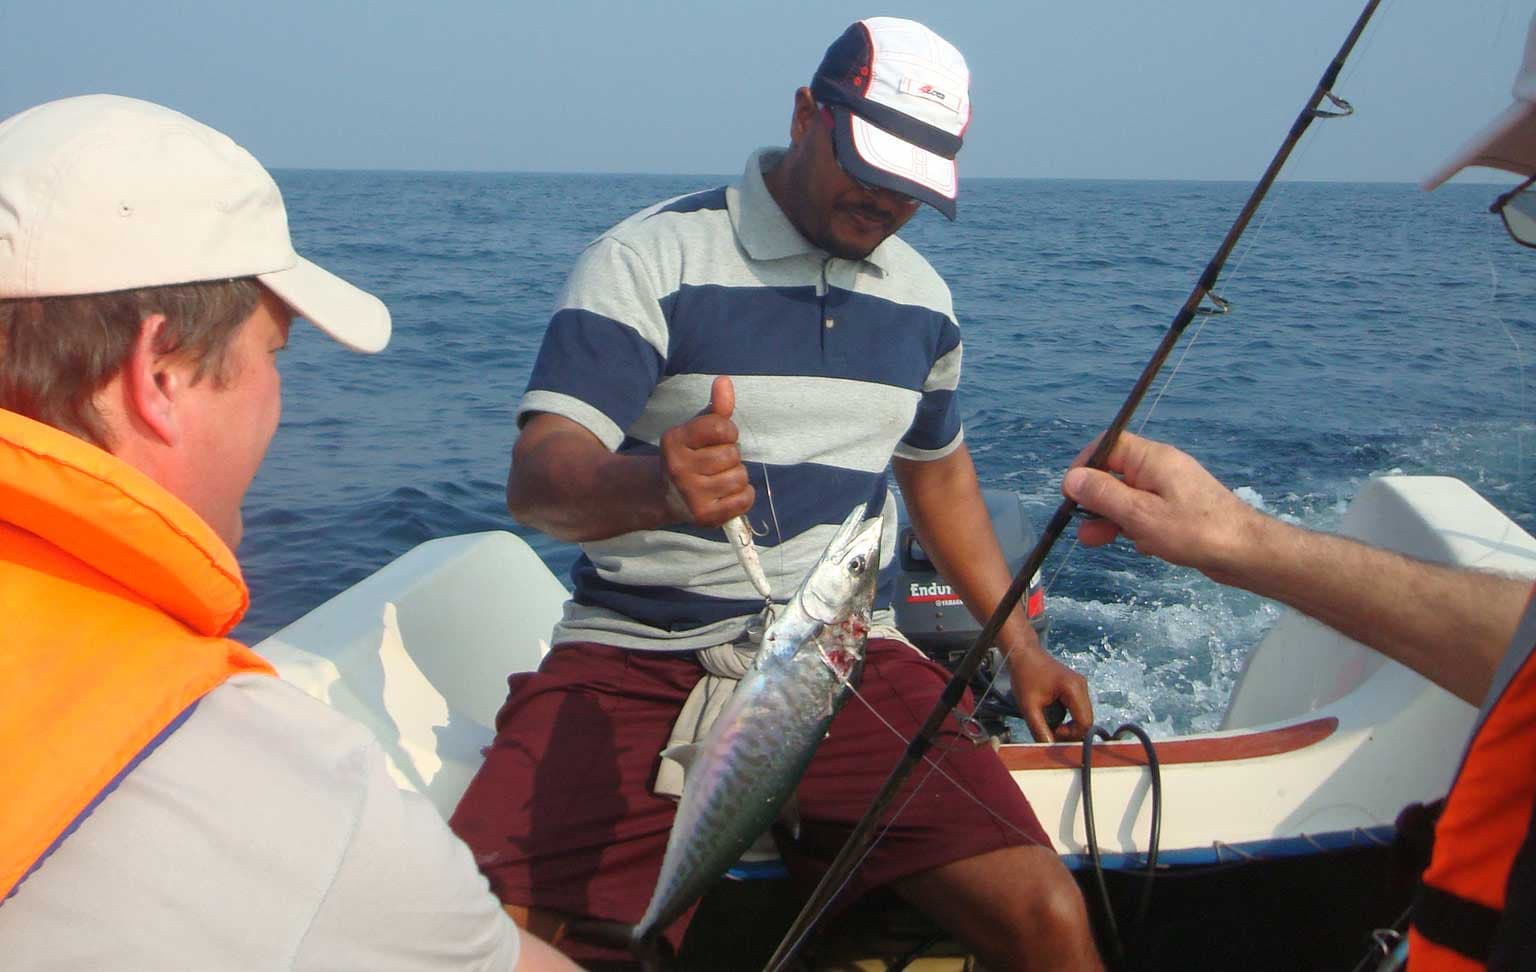 A well experienced guide showed how to catch fish in the Kalpitiya fishing tour